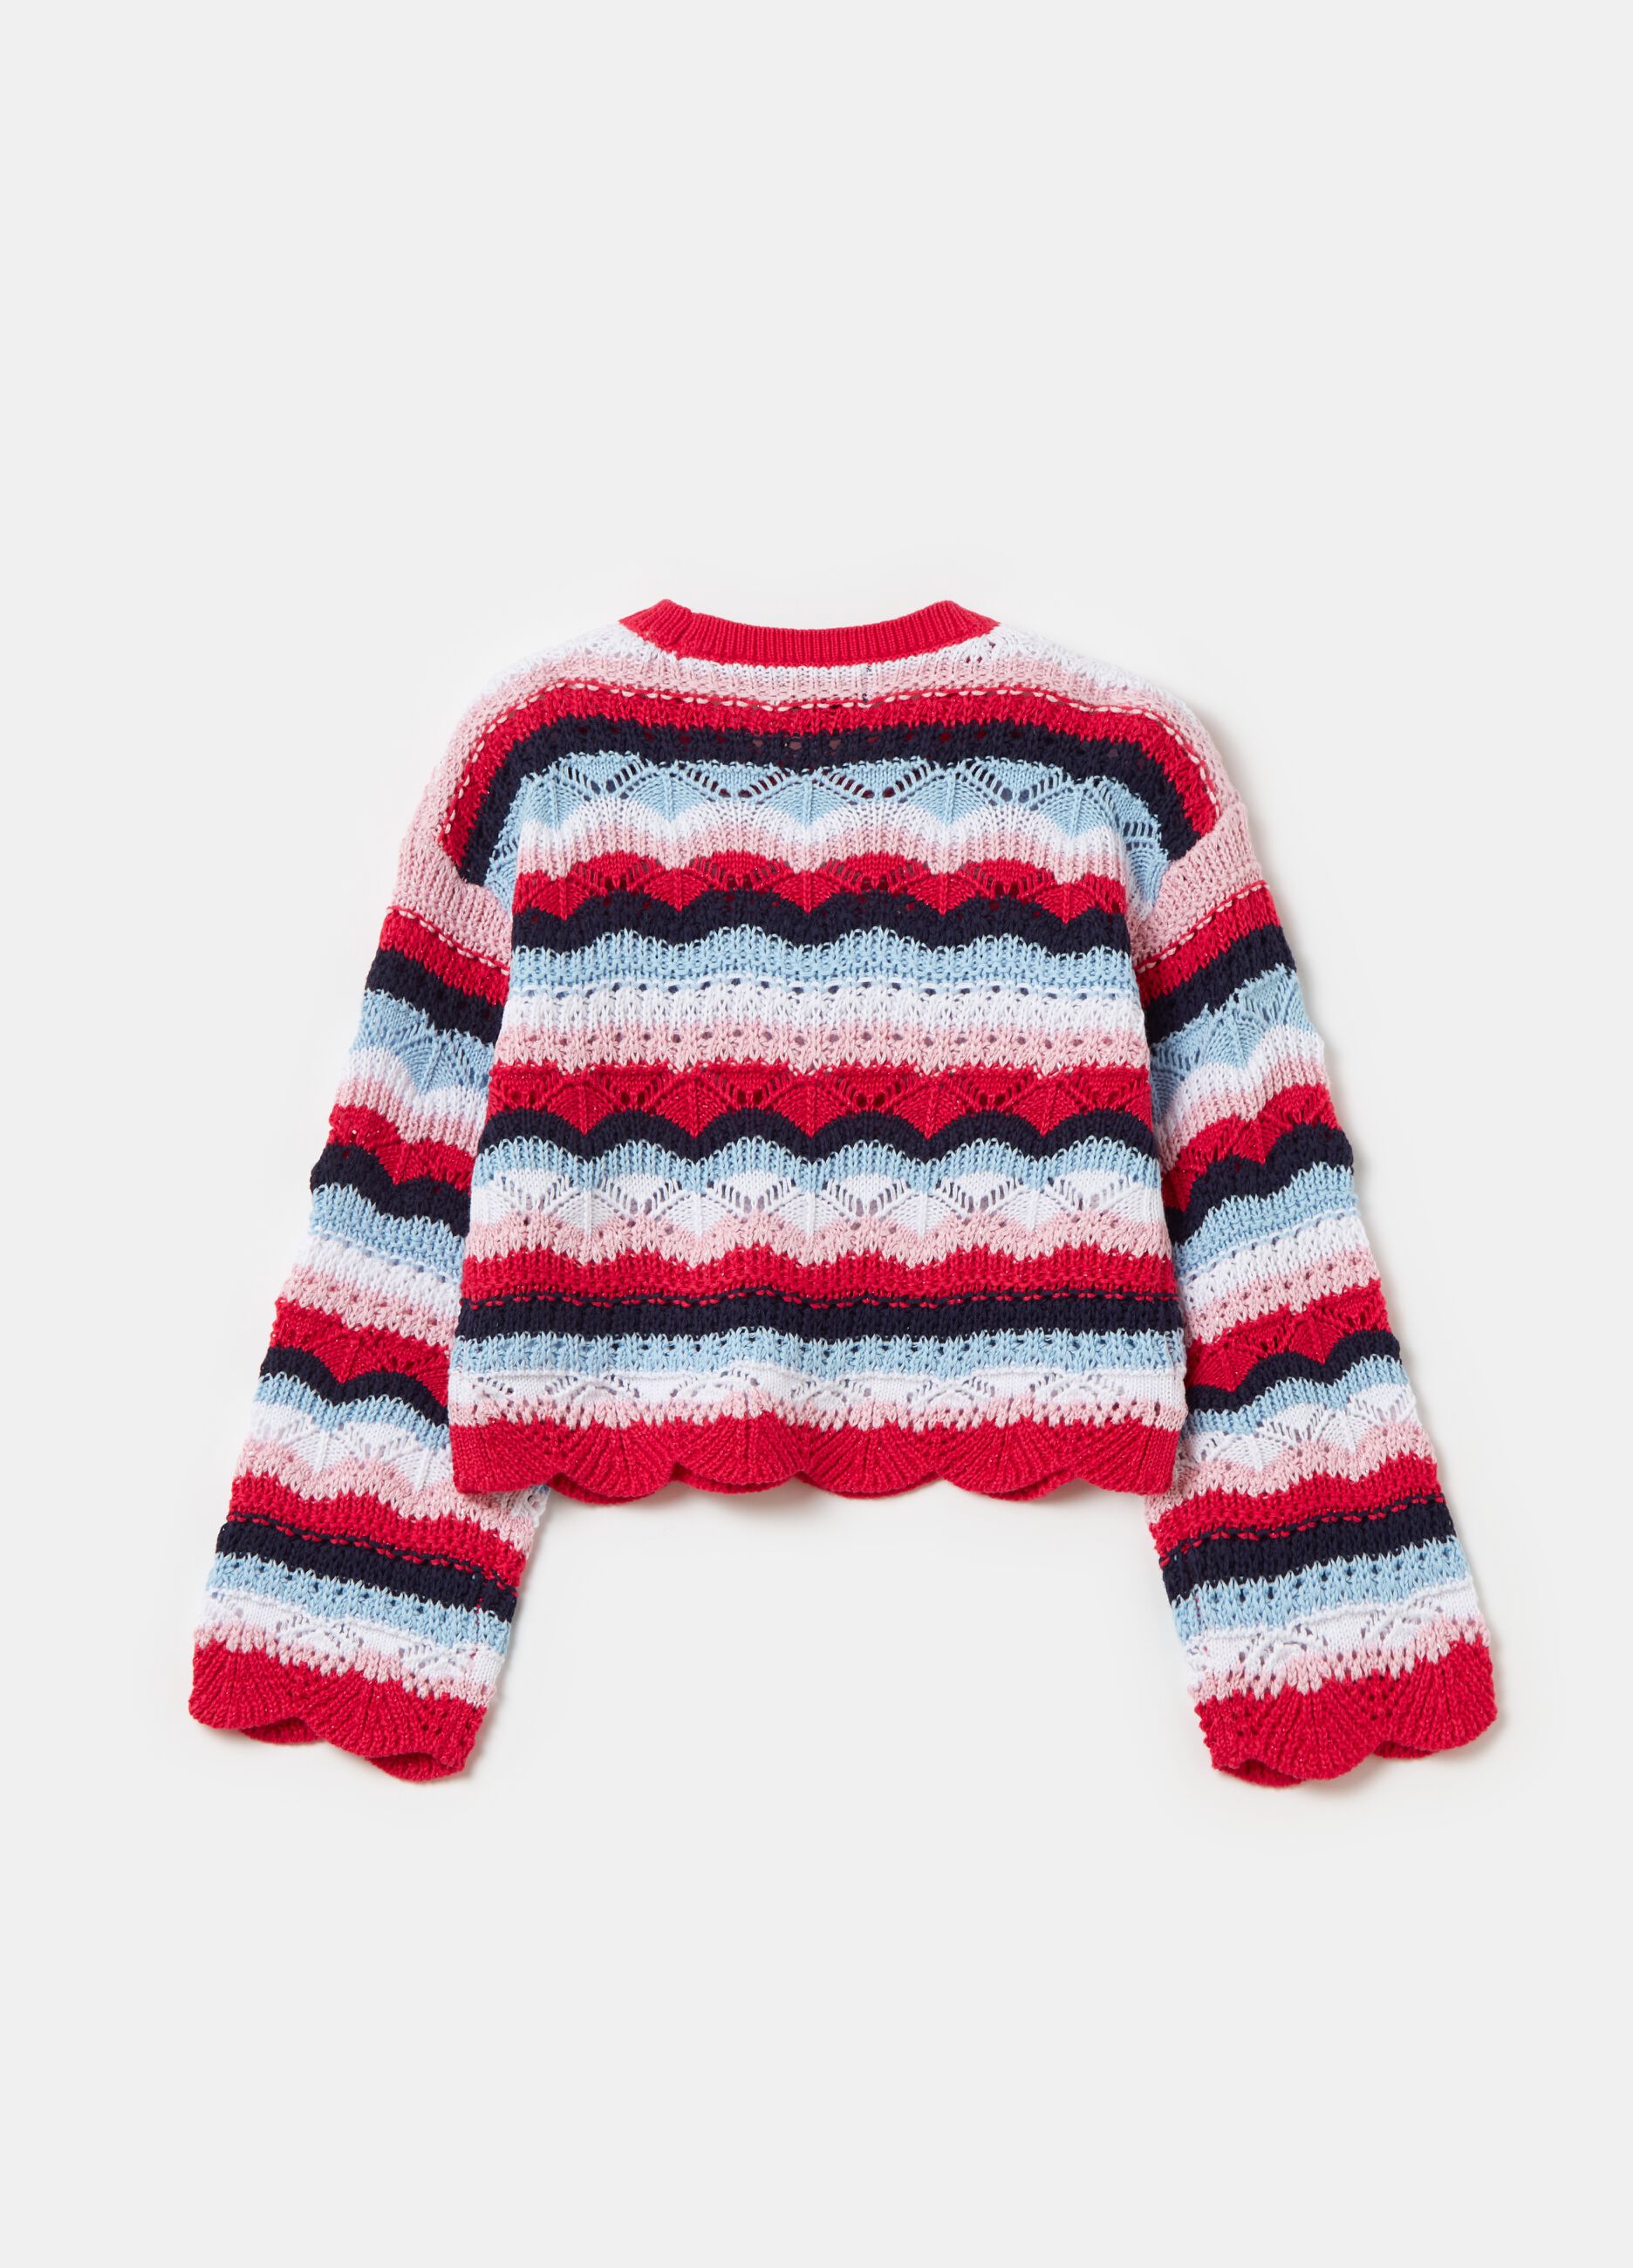 Striped pullover with crochet design